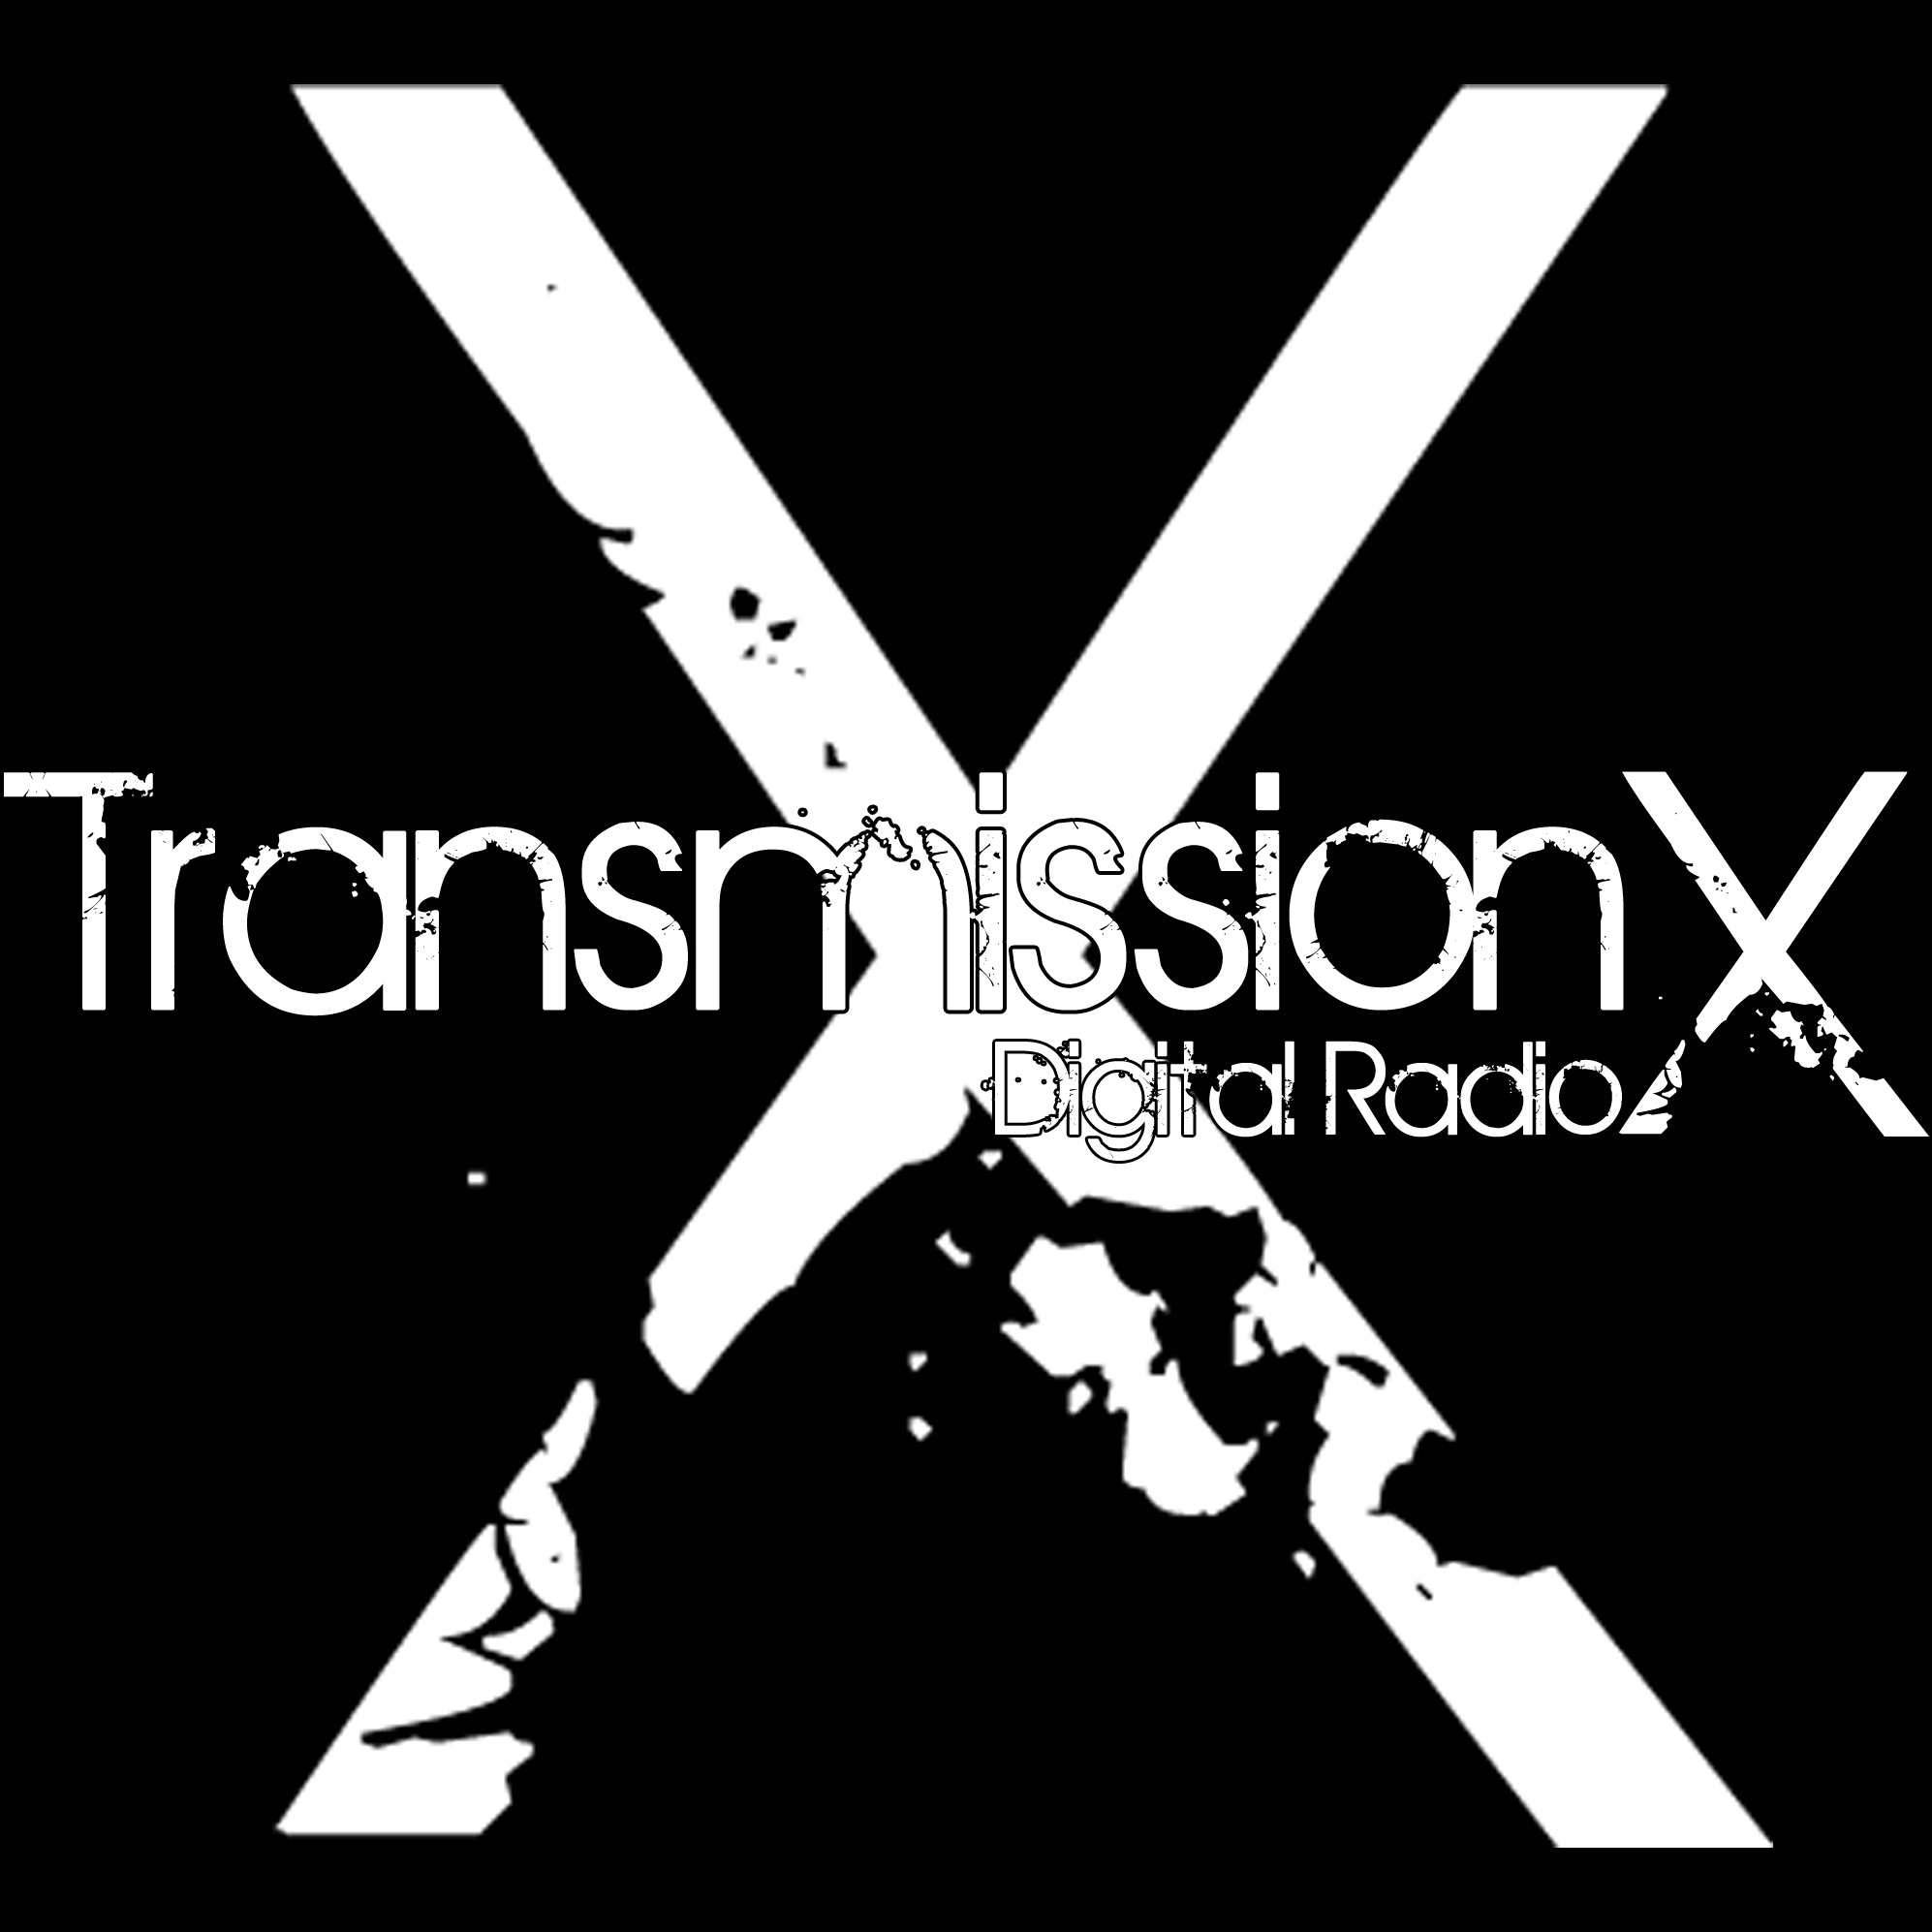 TransmissionX Digital Radio, a new radio station dedicated to serious followers of music launching 20th December 2014.